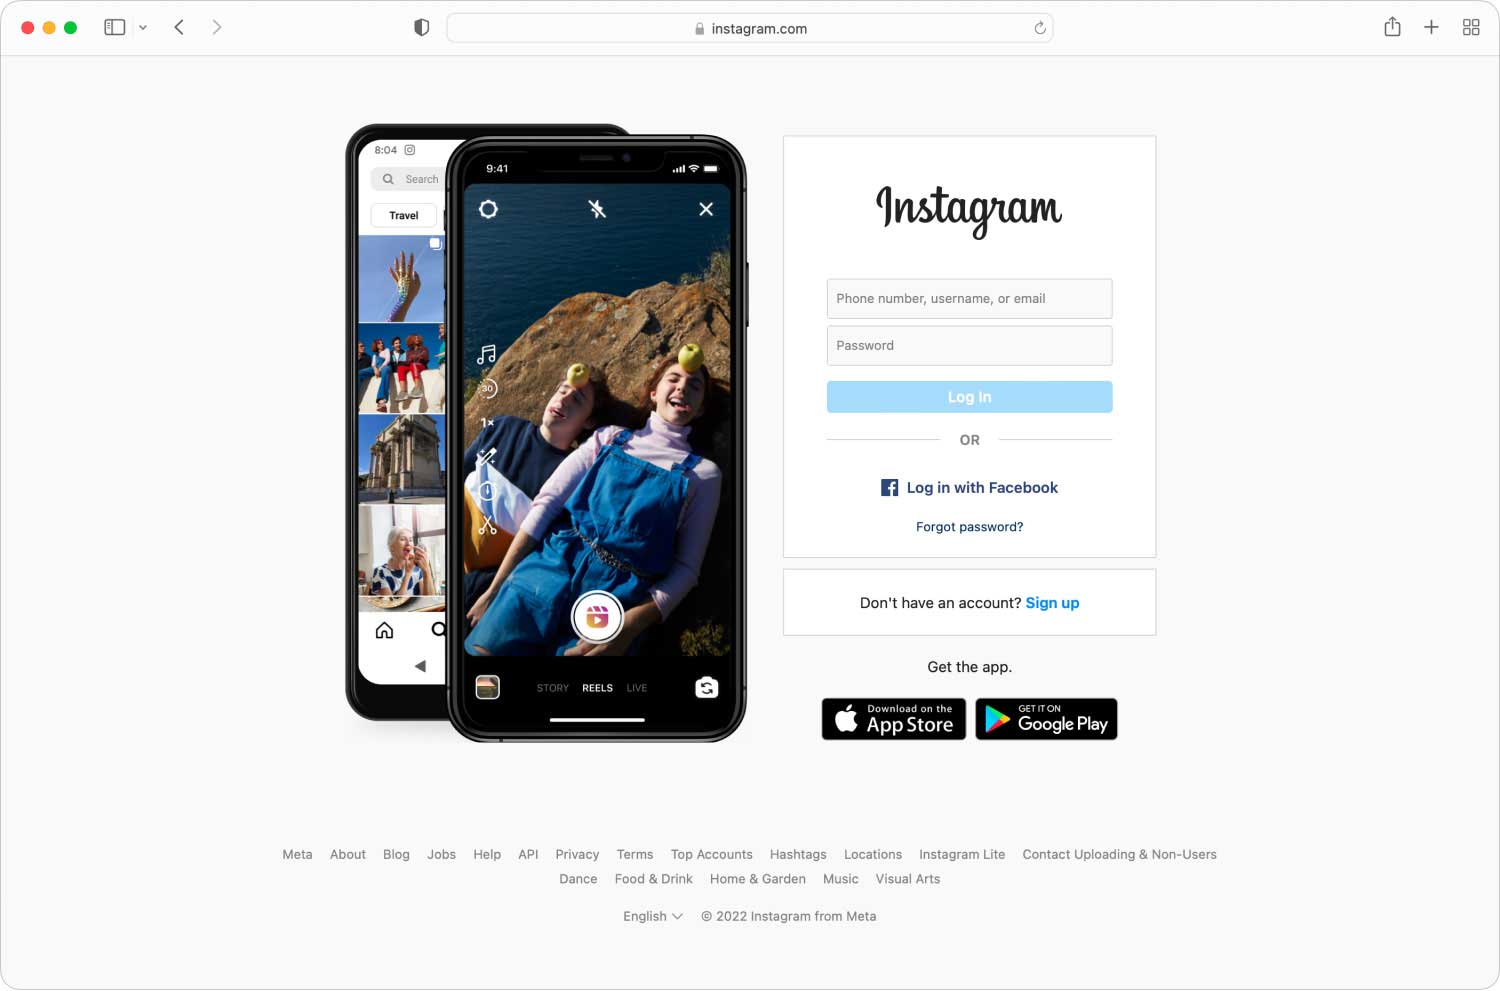 Go to the Instagram Website to Clear Instagram Cache on Windows